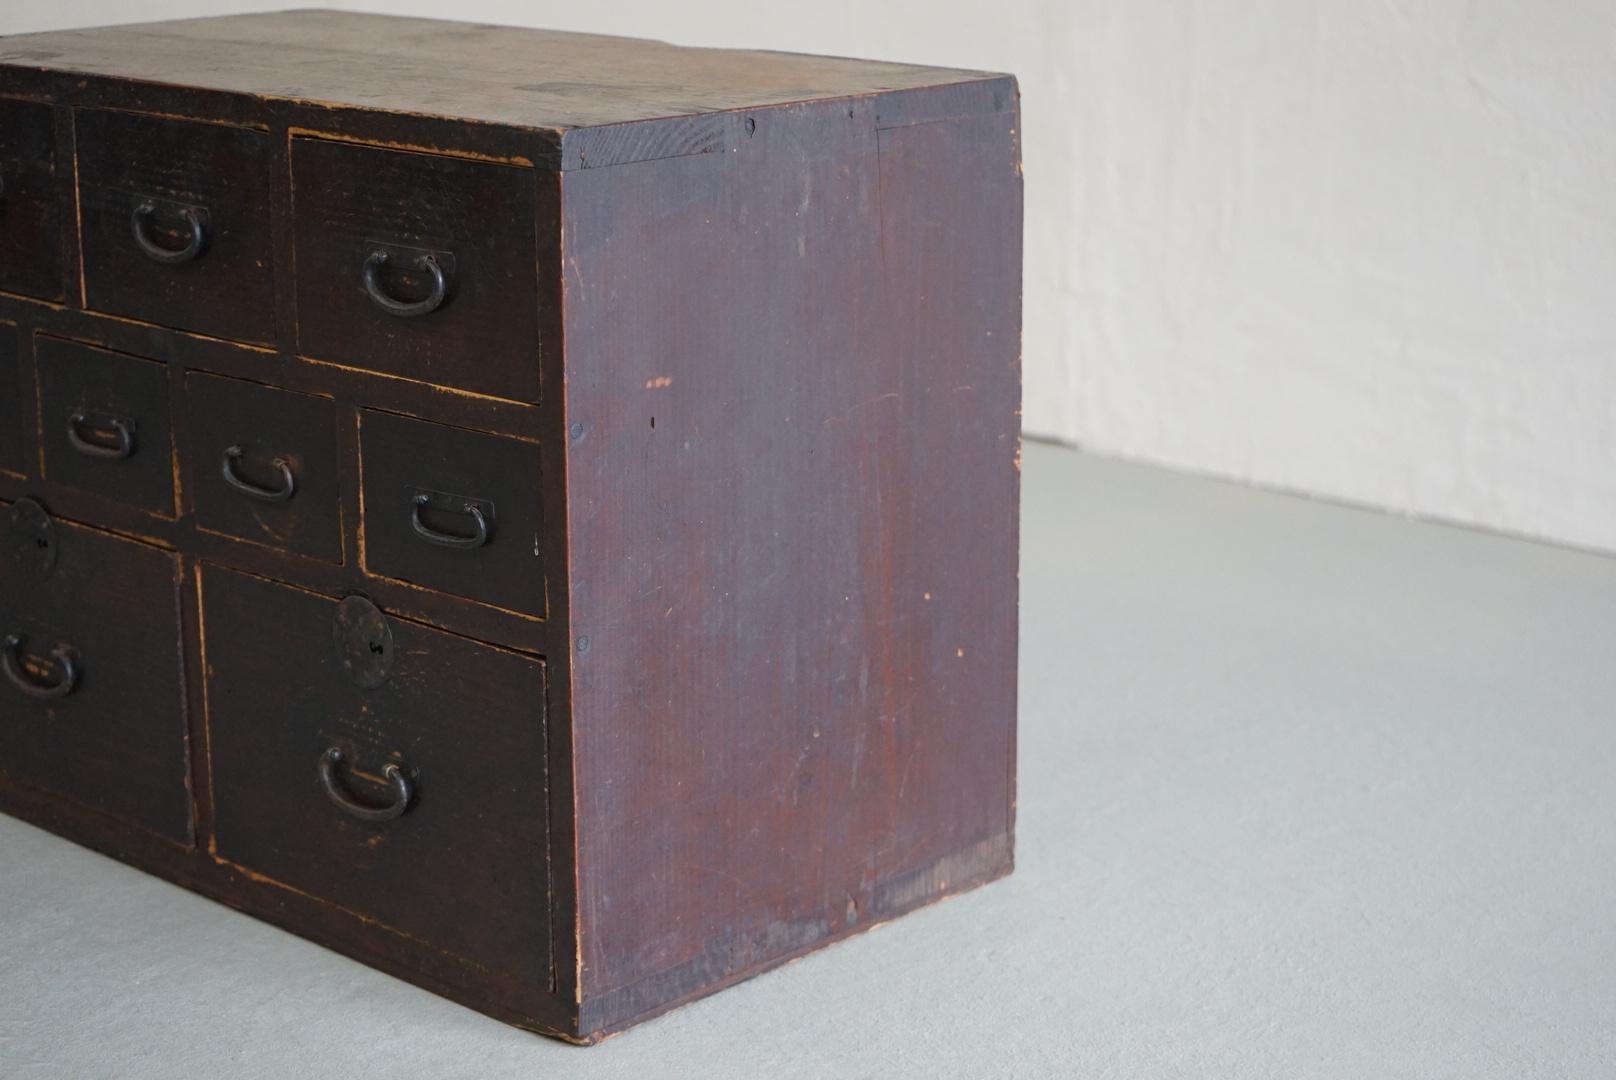 Japanese Antique Wooden Drawers Storage Box 1910s-1930s Wabi-Sabi In Good Condition For Sale In Chiba-Shi, JP